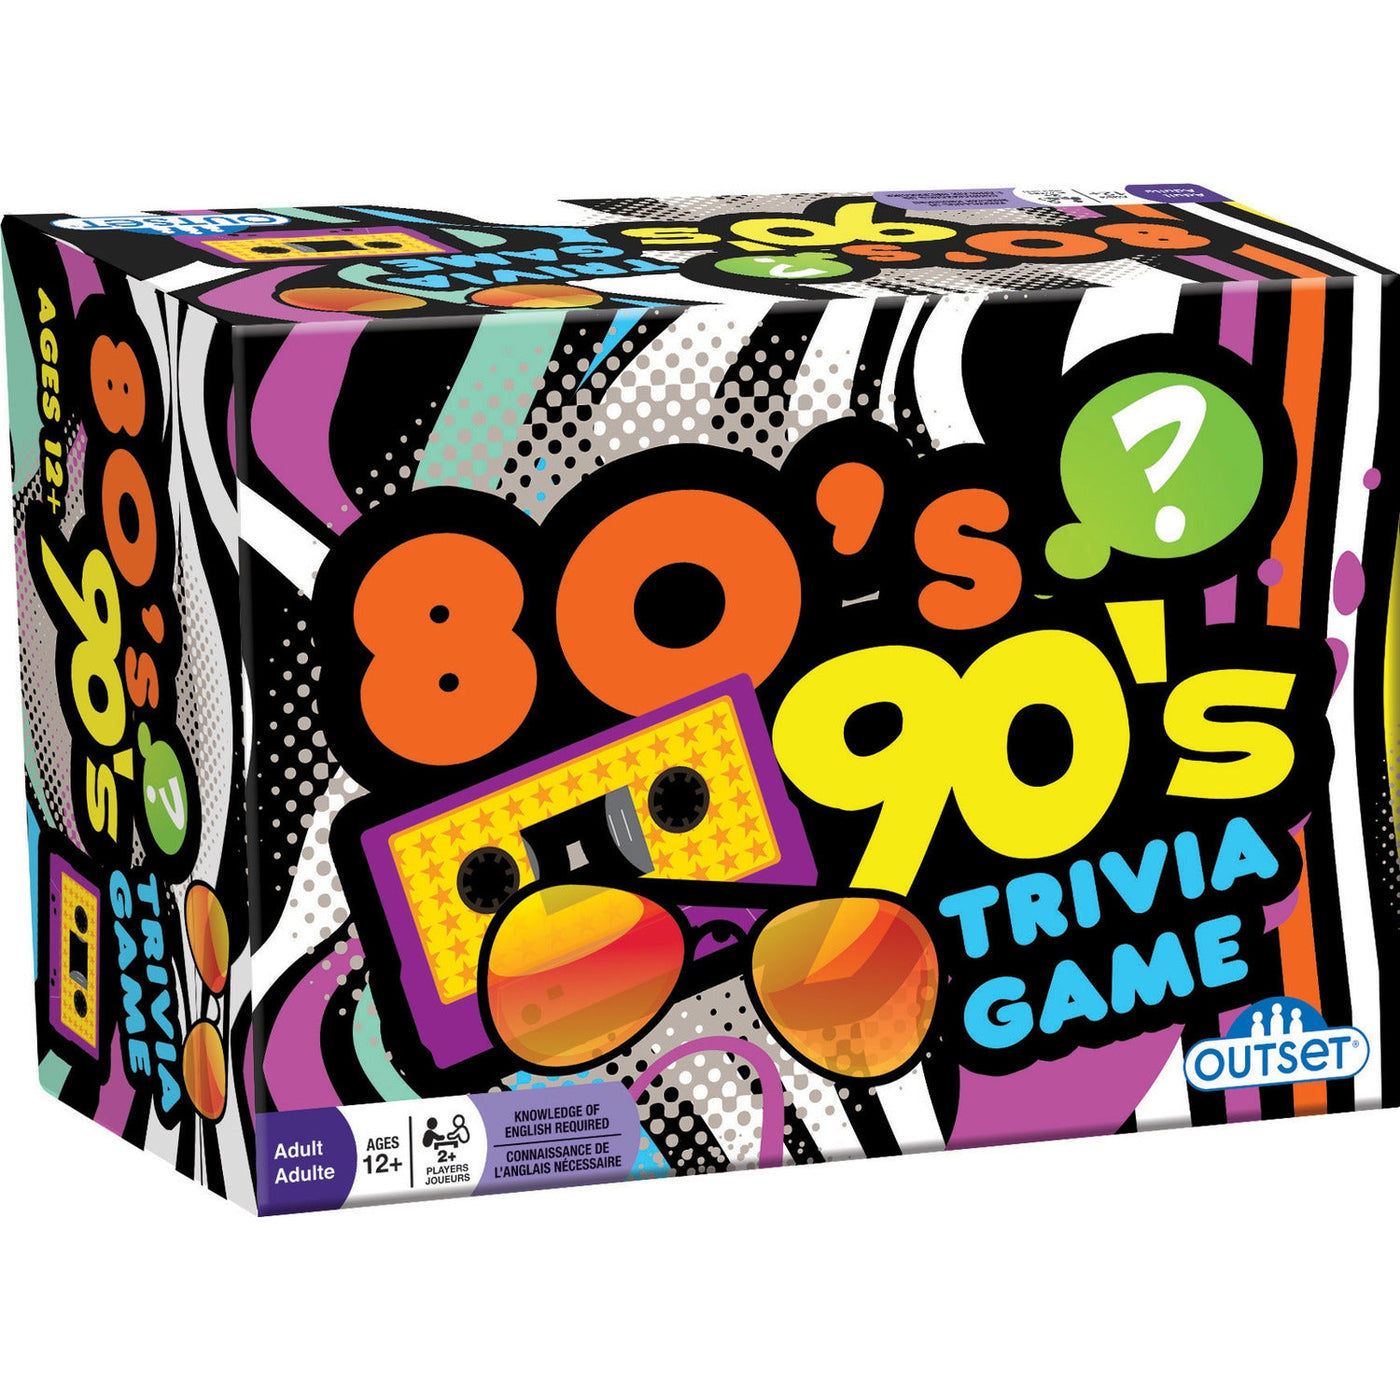 80s & 90s Trivia Game